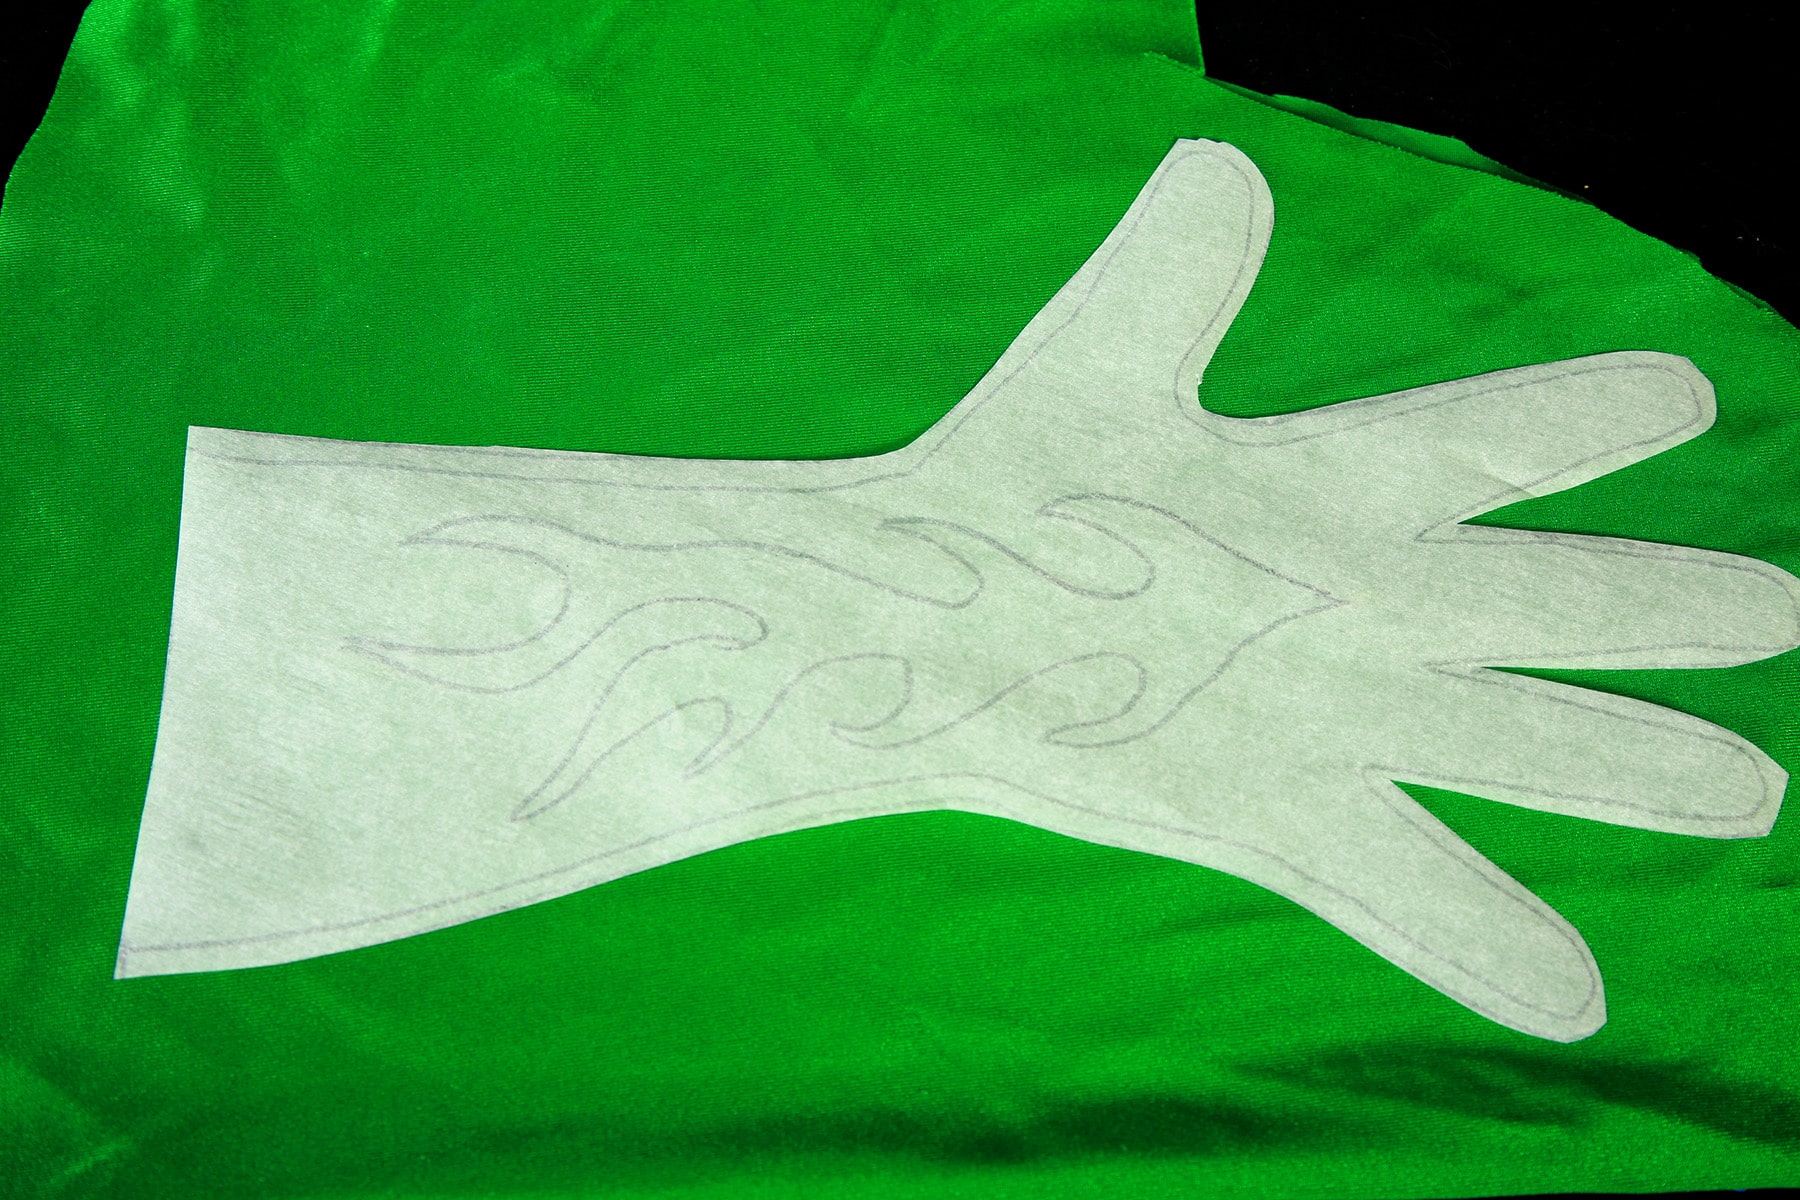 The paper glove pattern rests on top of the darker green spandex.